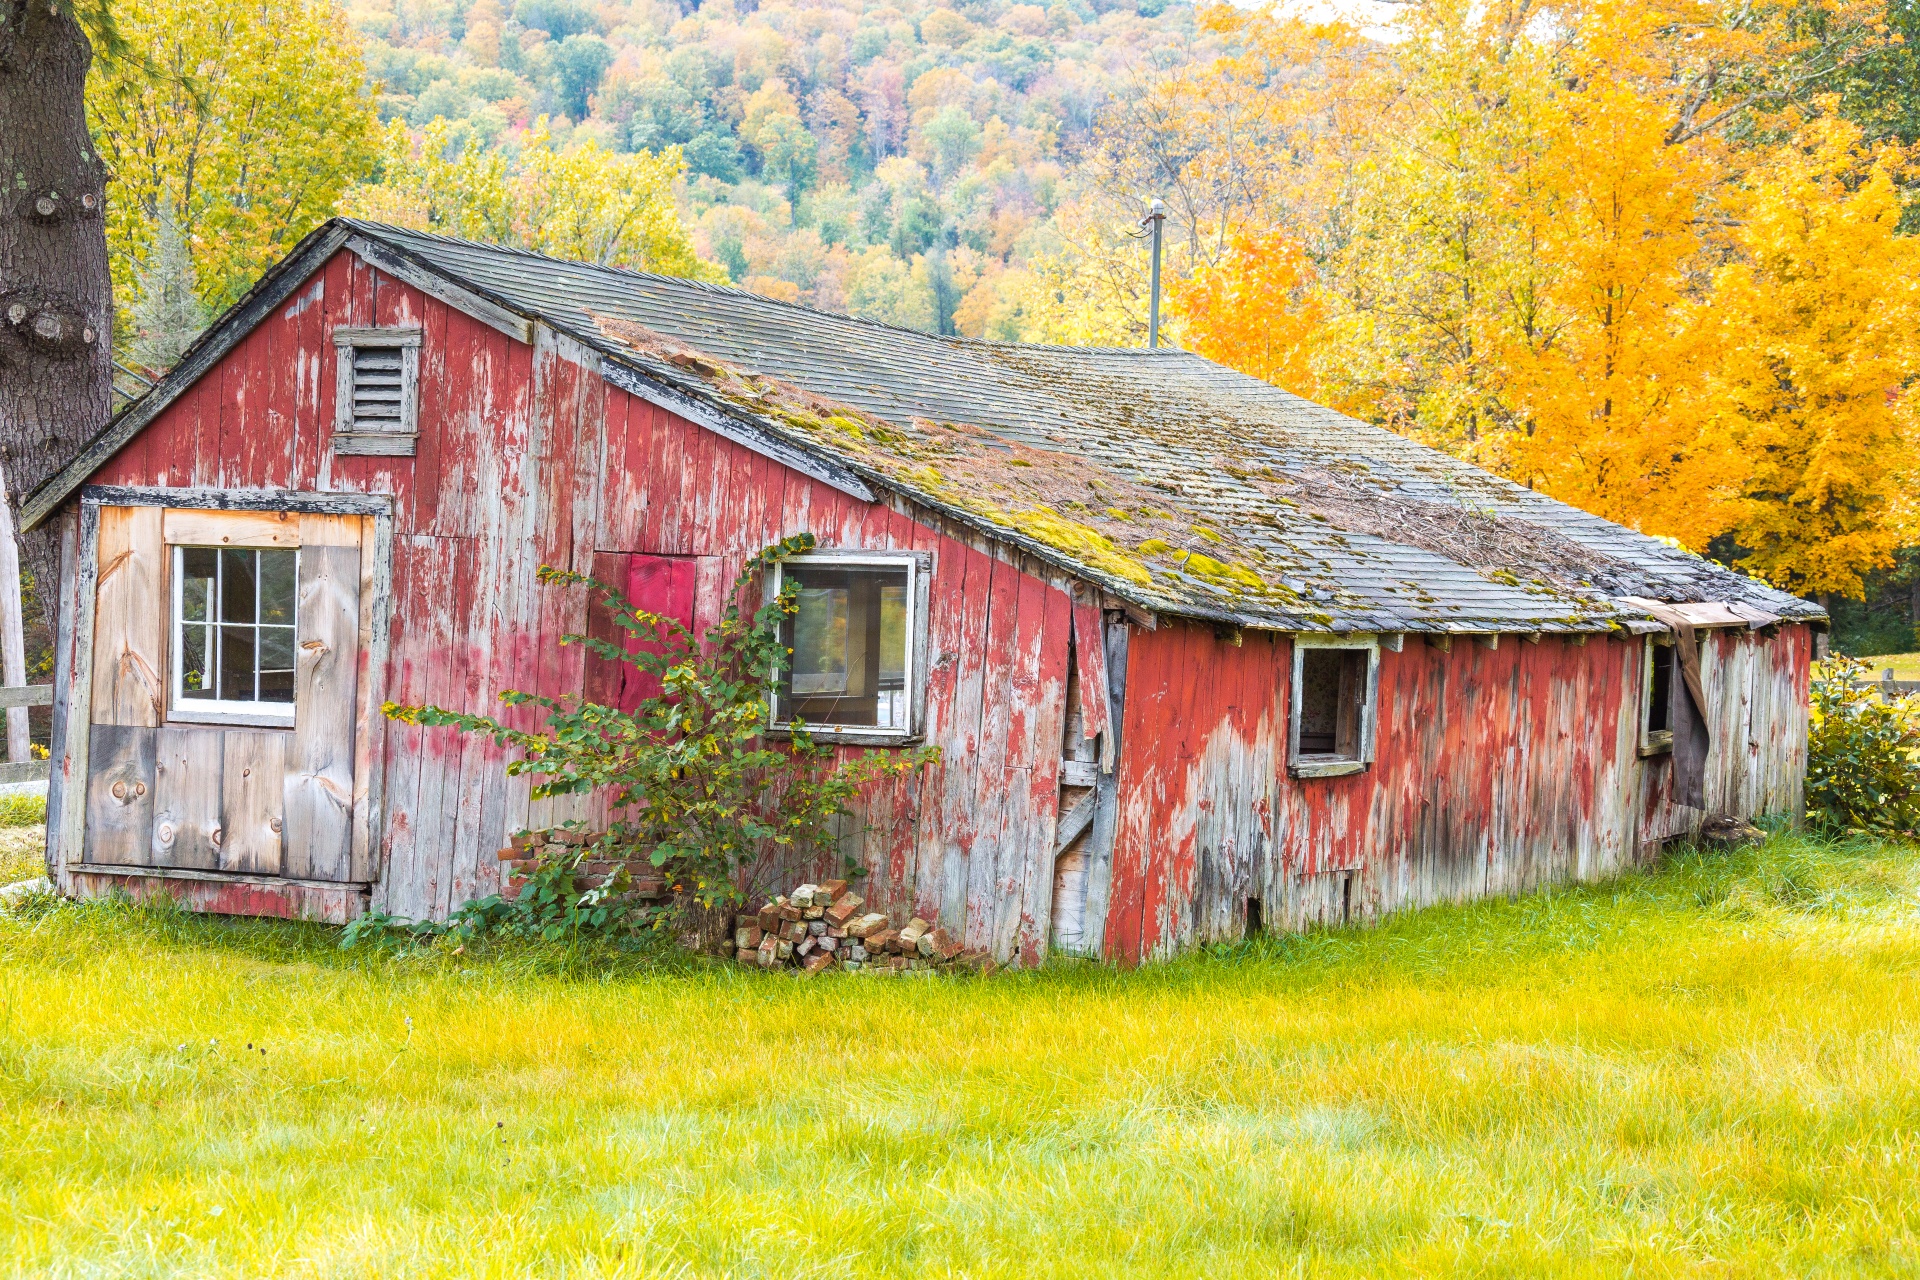 Abandoned house in fall